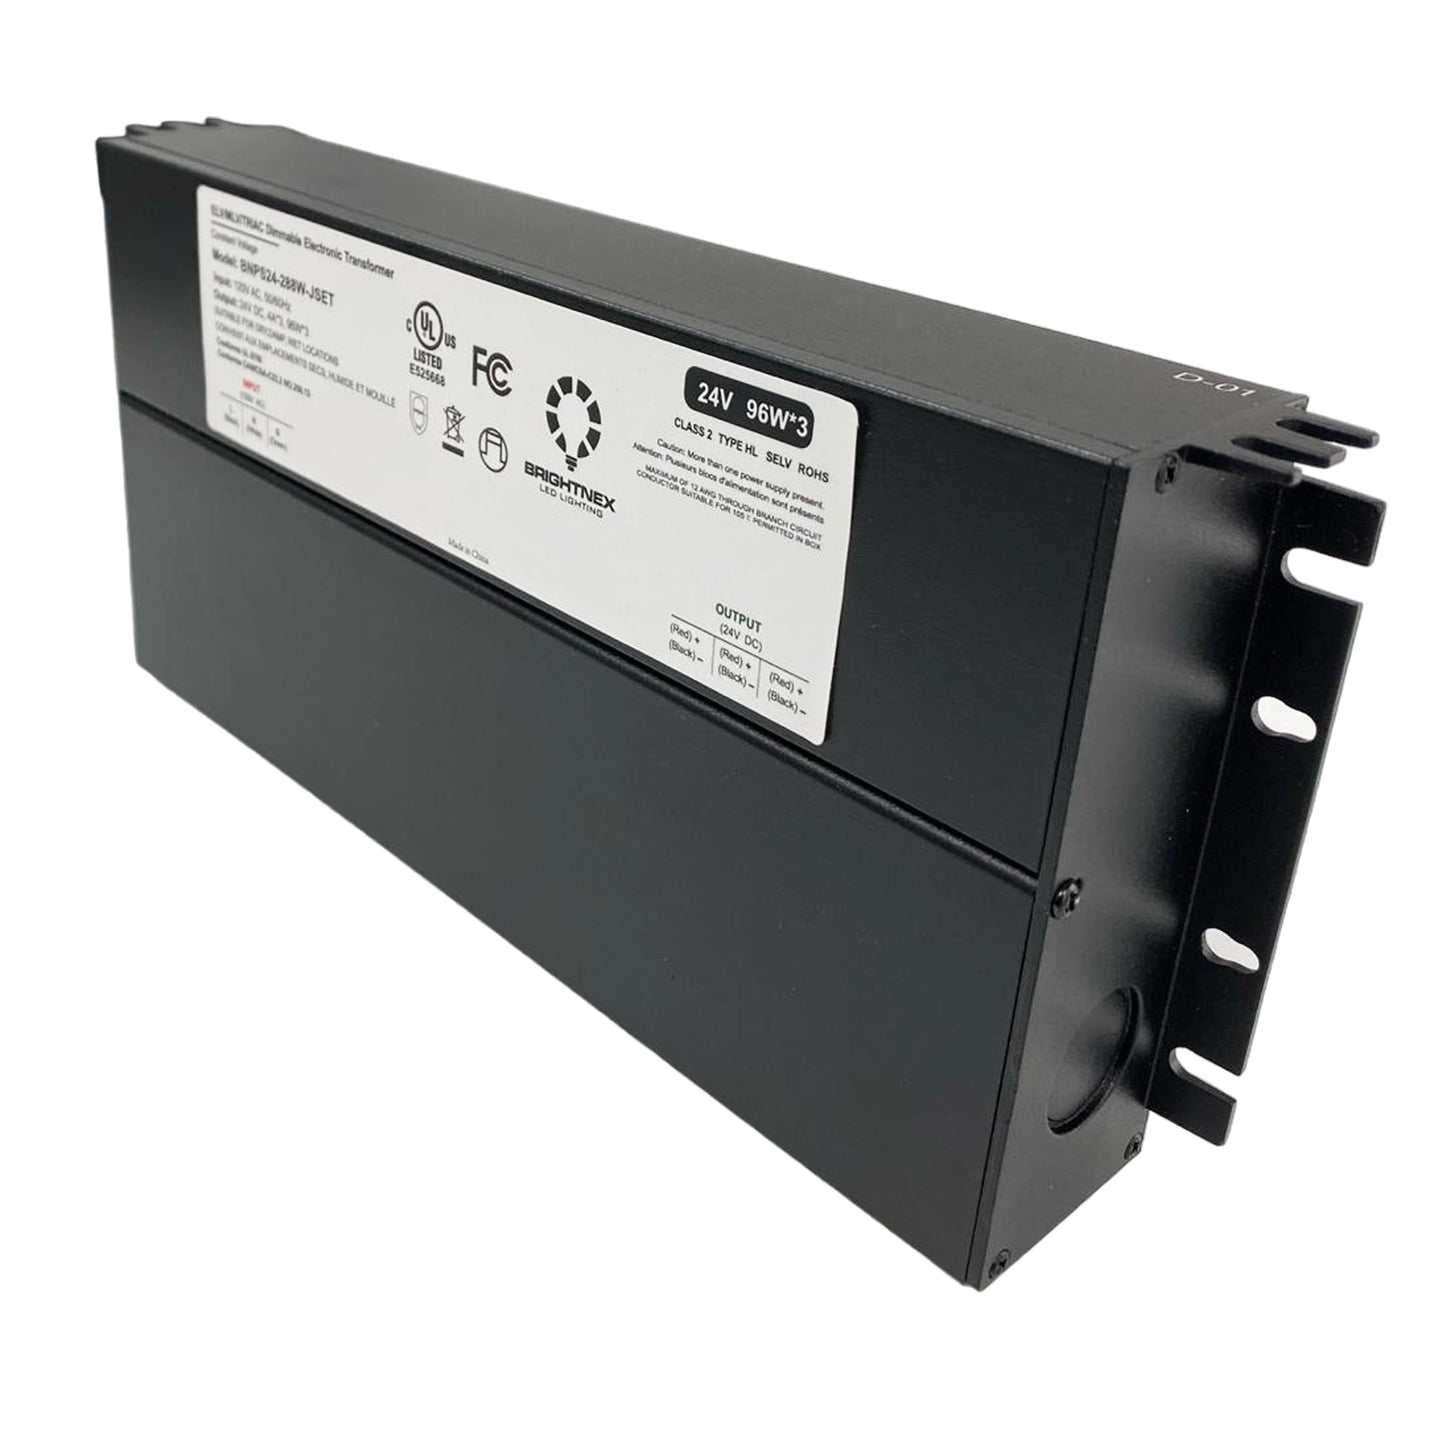 Dimmable LED Driver 24V,288W for Wet, Damp, Dry Locations, Class 2, UL Certified (Dimmable LED Transformer)